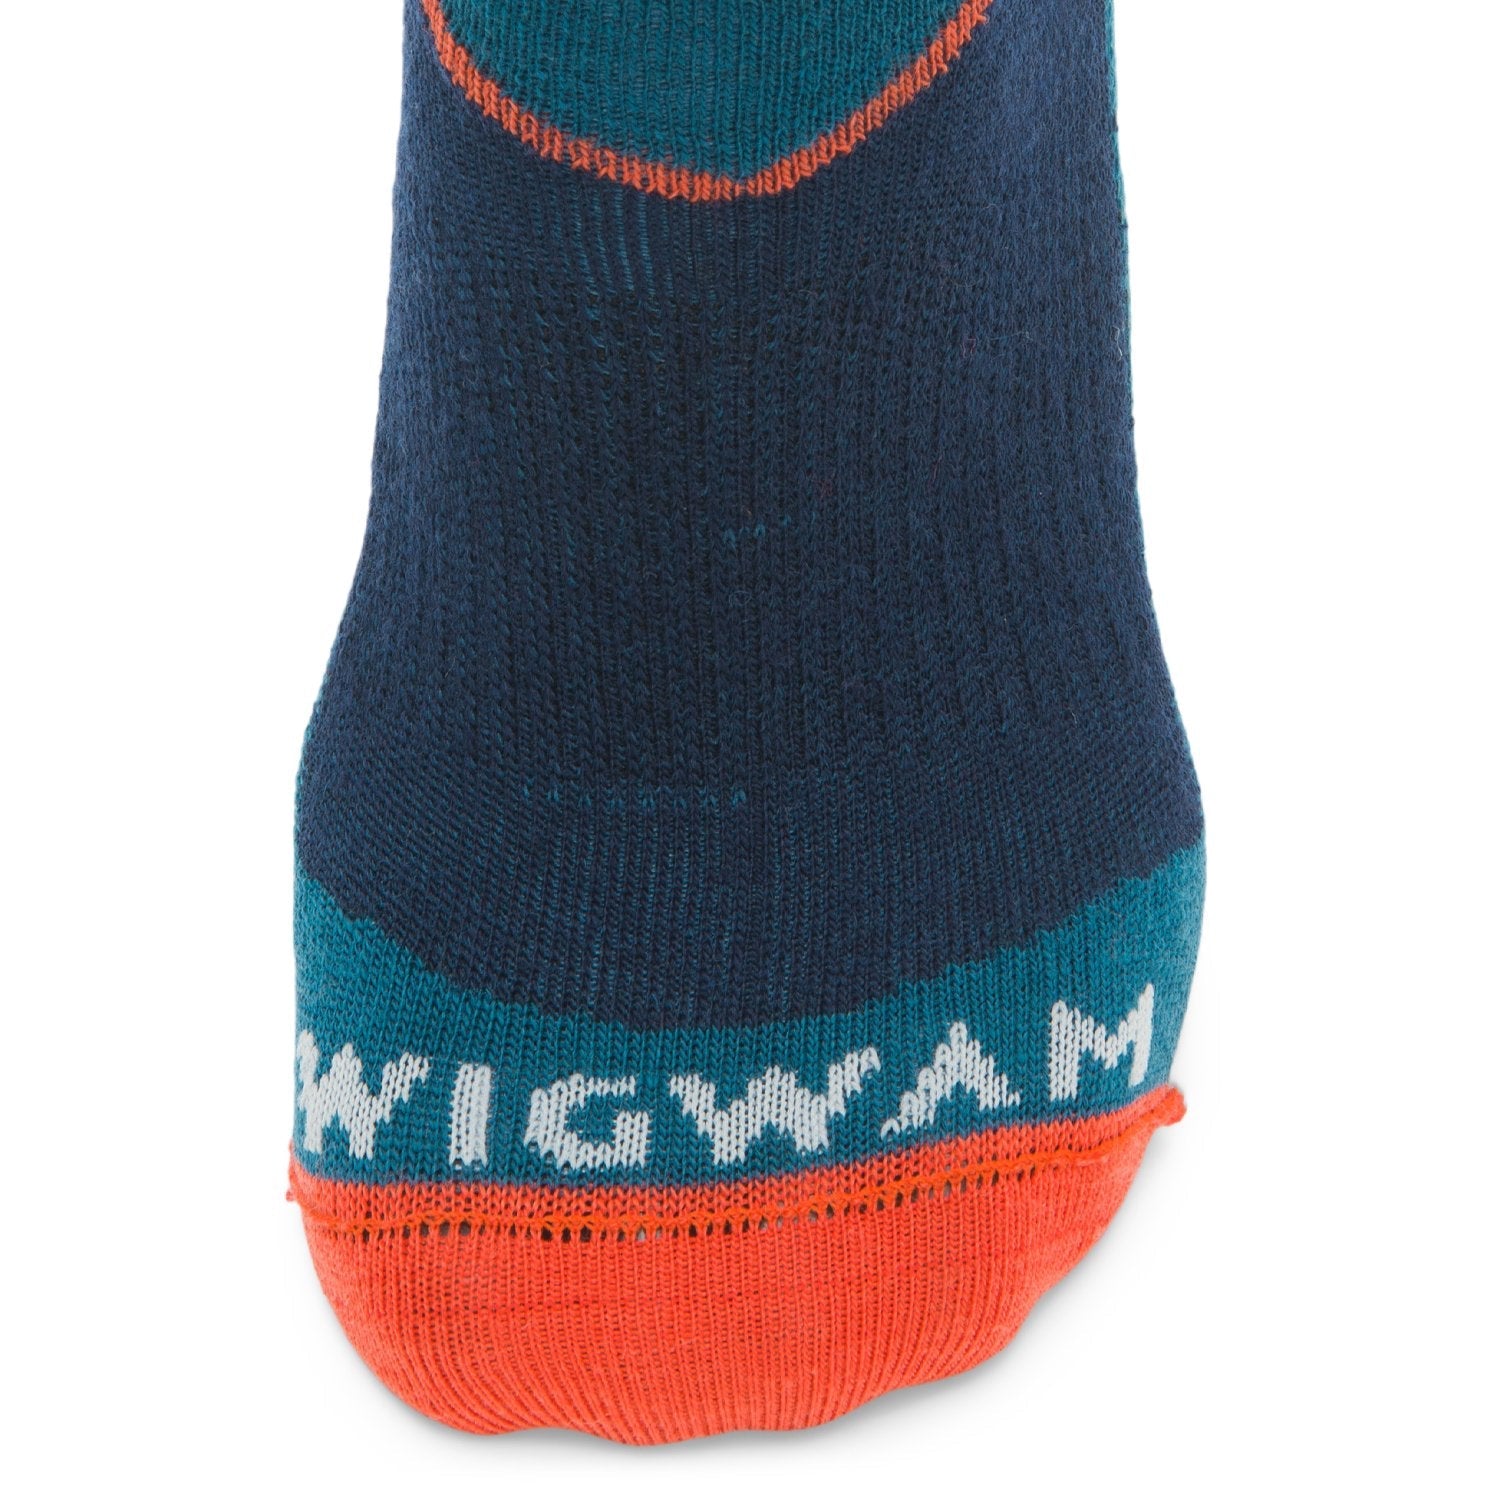 Snow Junkie Ultra Lightweight Over-The-Calf Sock - Navy II toe perspective - made in The USA Wigwam Socks